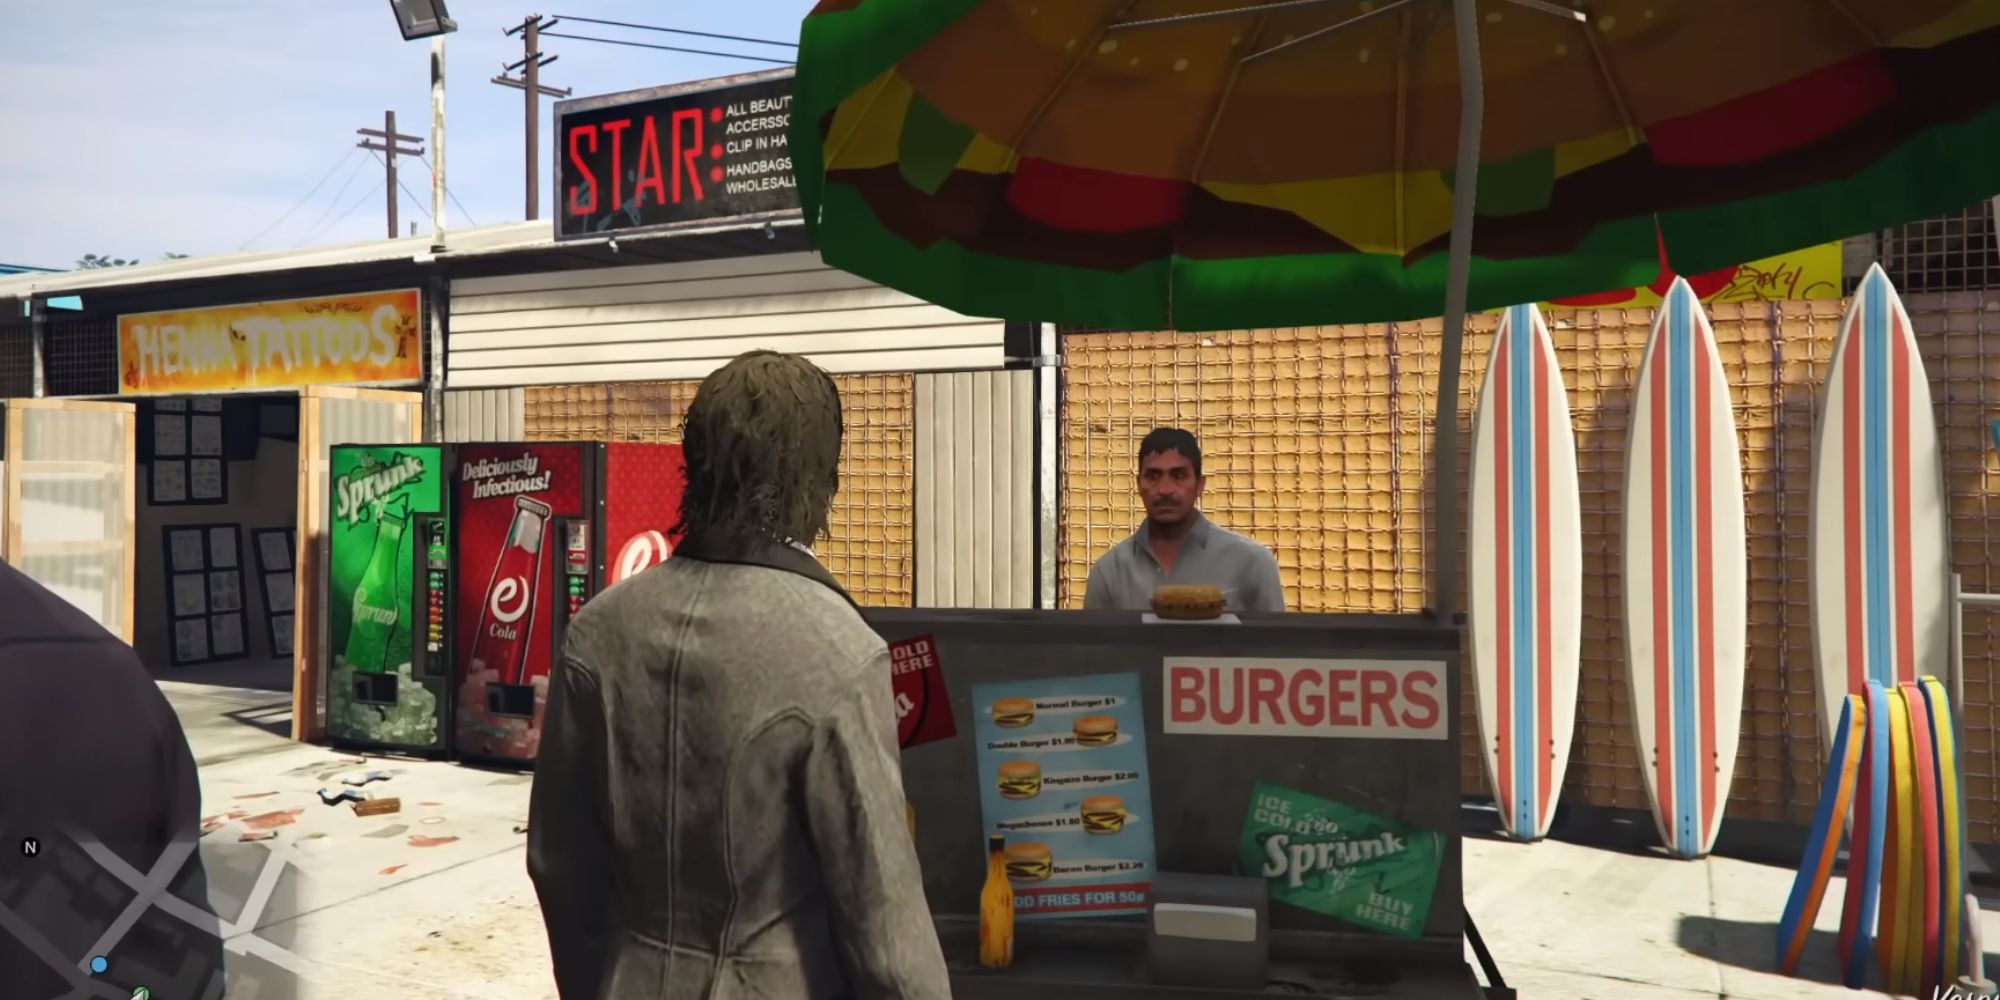 A man stands at a burger stand on a sunny street. It appears to be near a beach. The screenshot is from GTA 5.